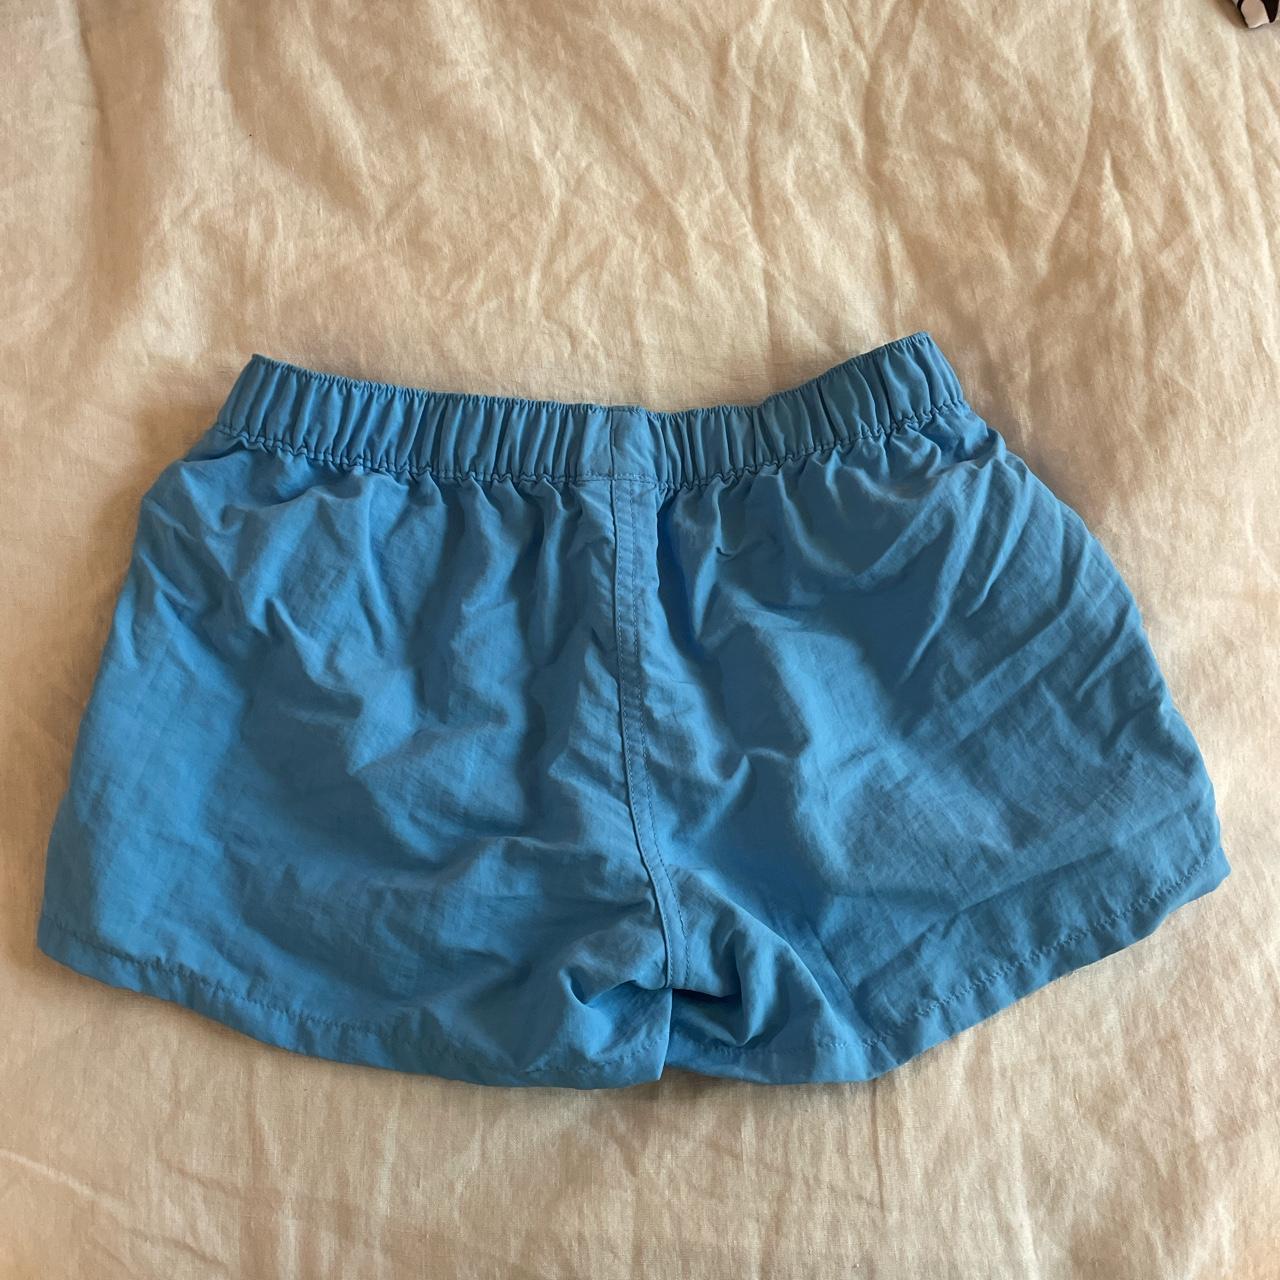 Blue short Patagonia shorts. Fit is small - Depop